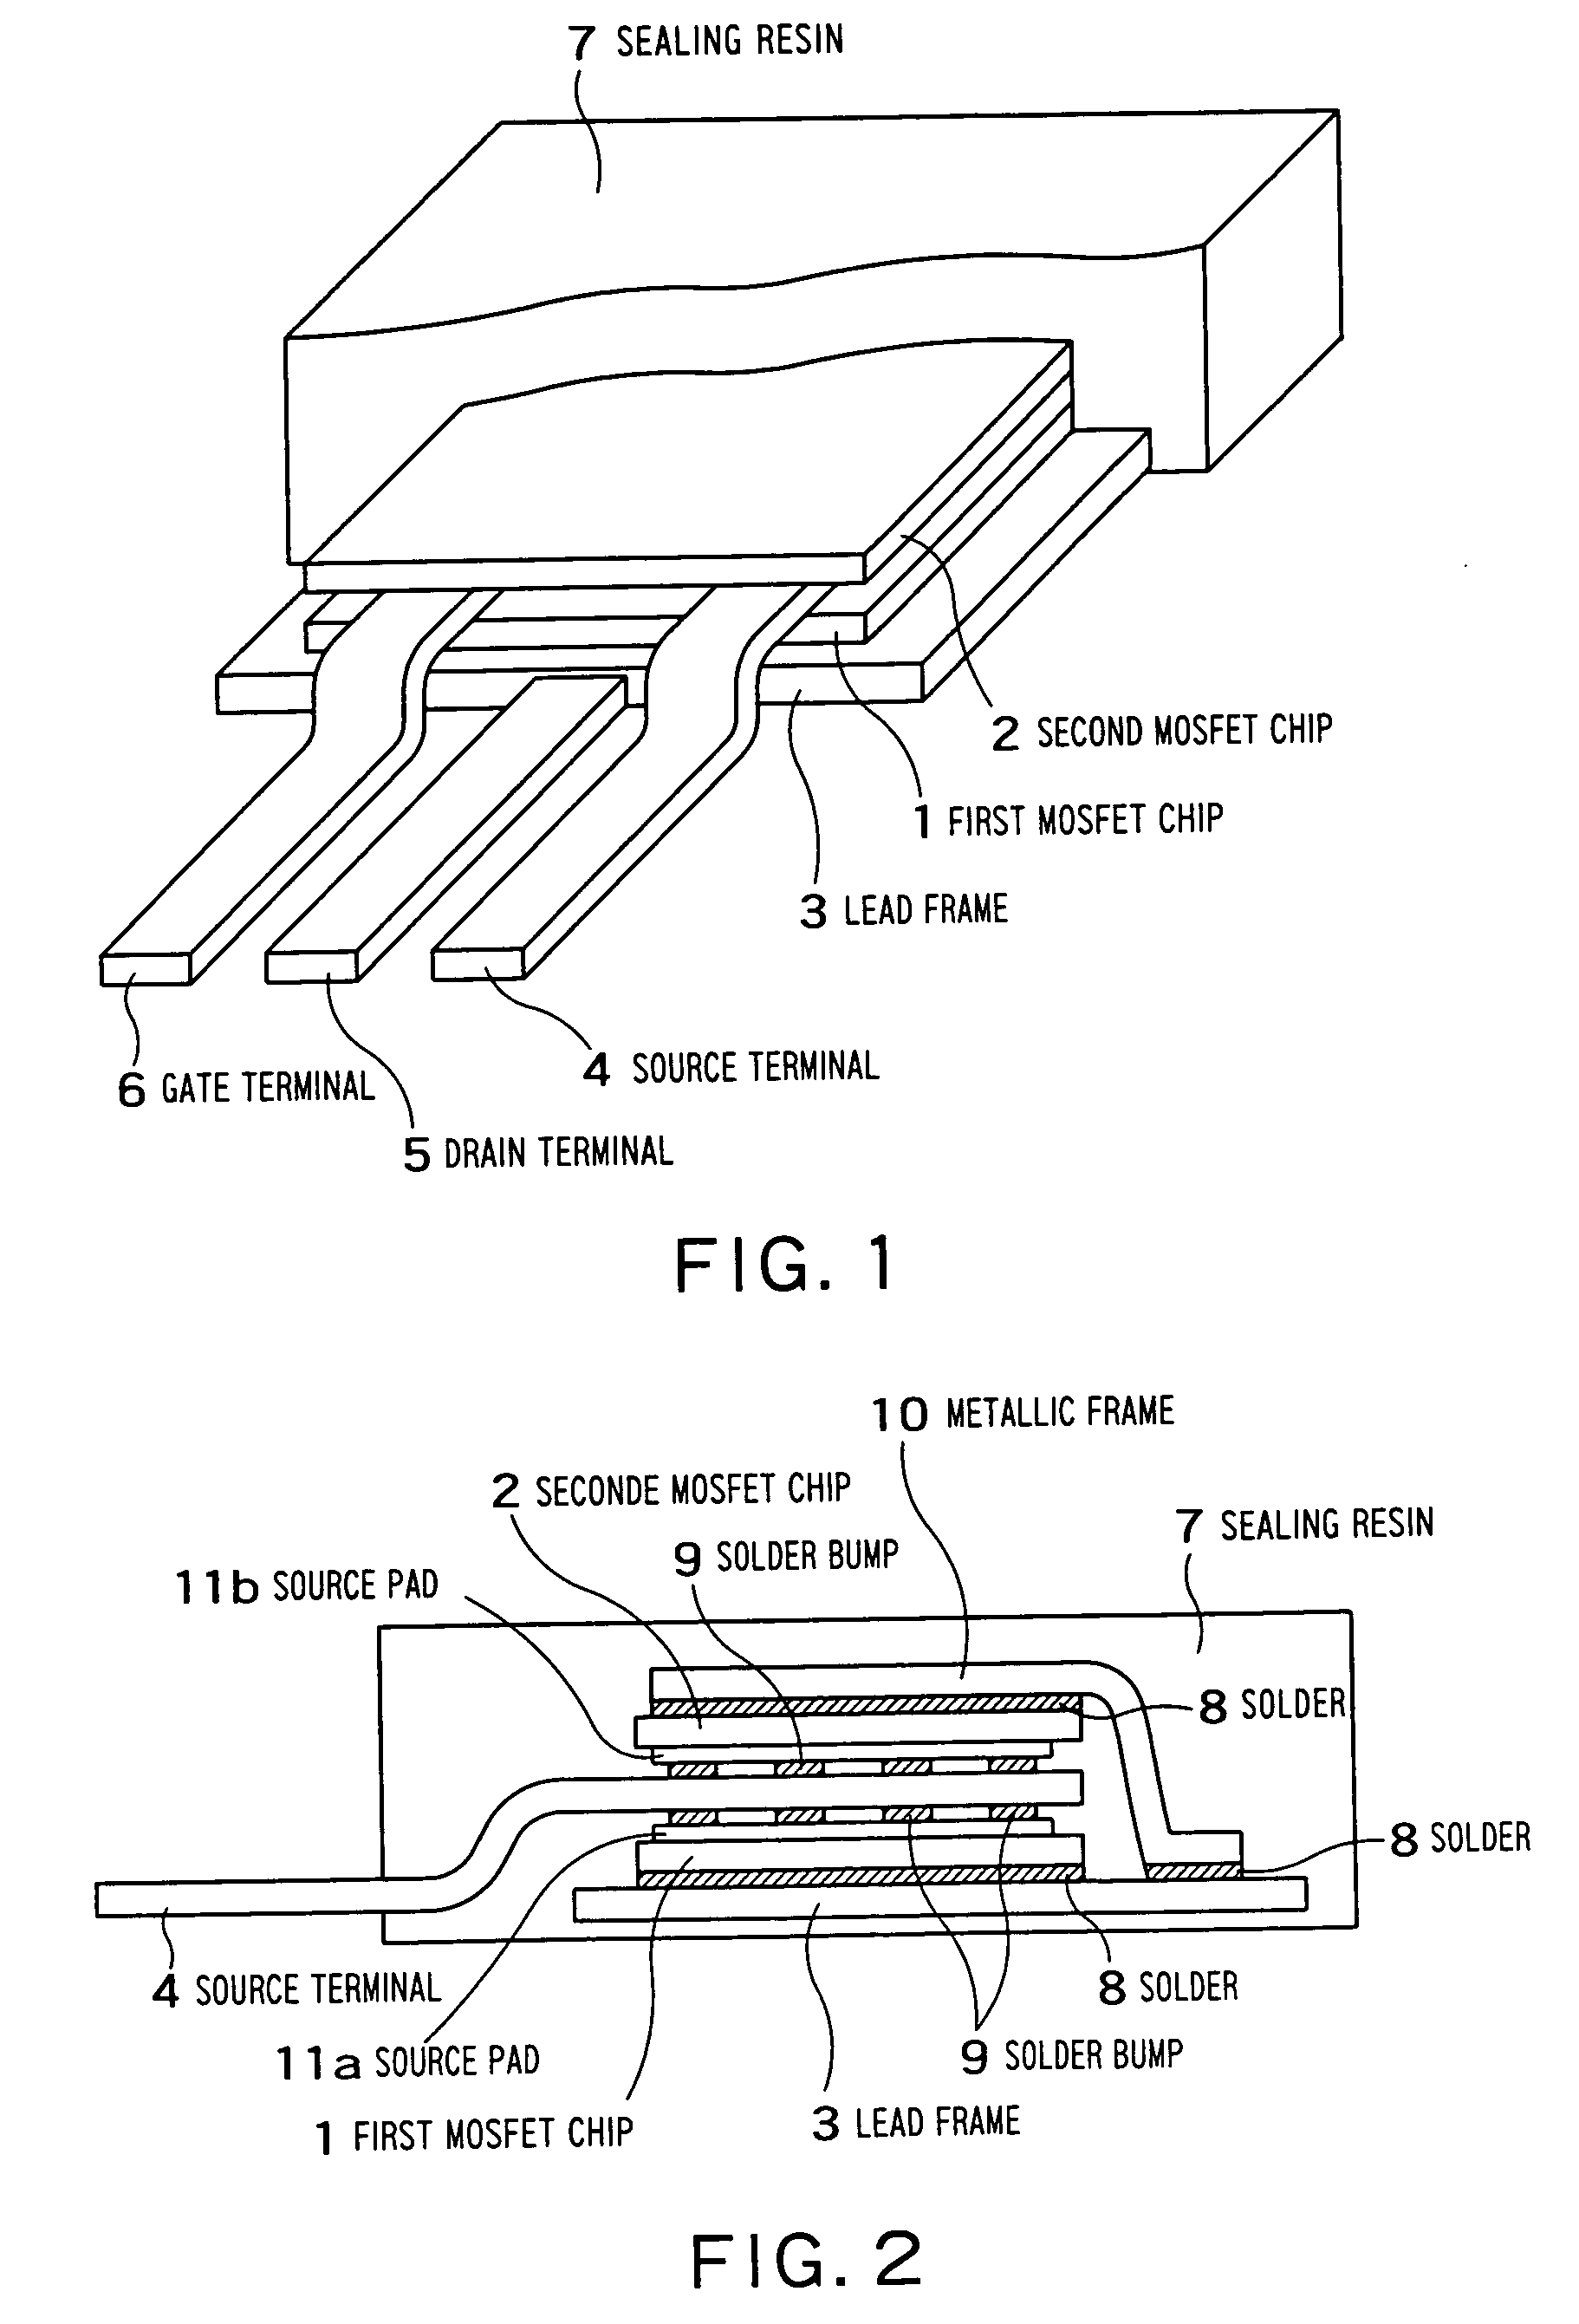 Power semiconductor device package